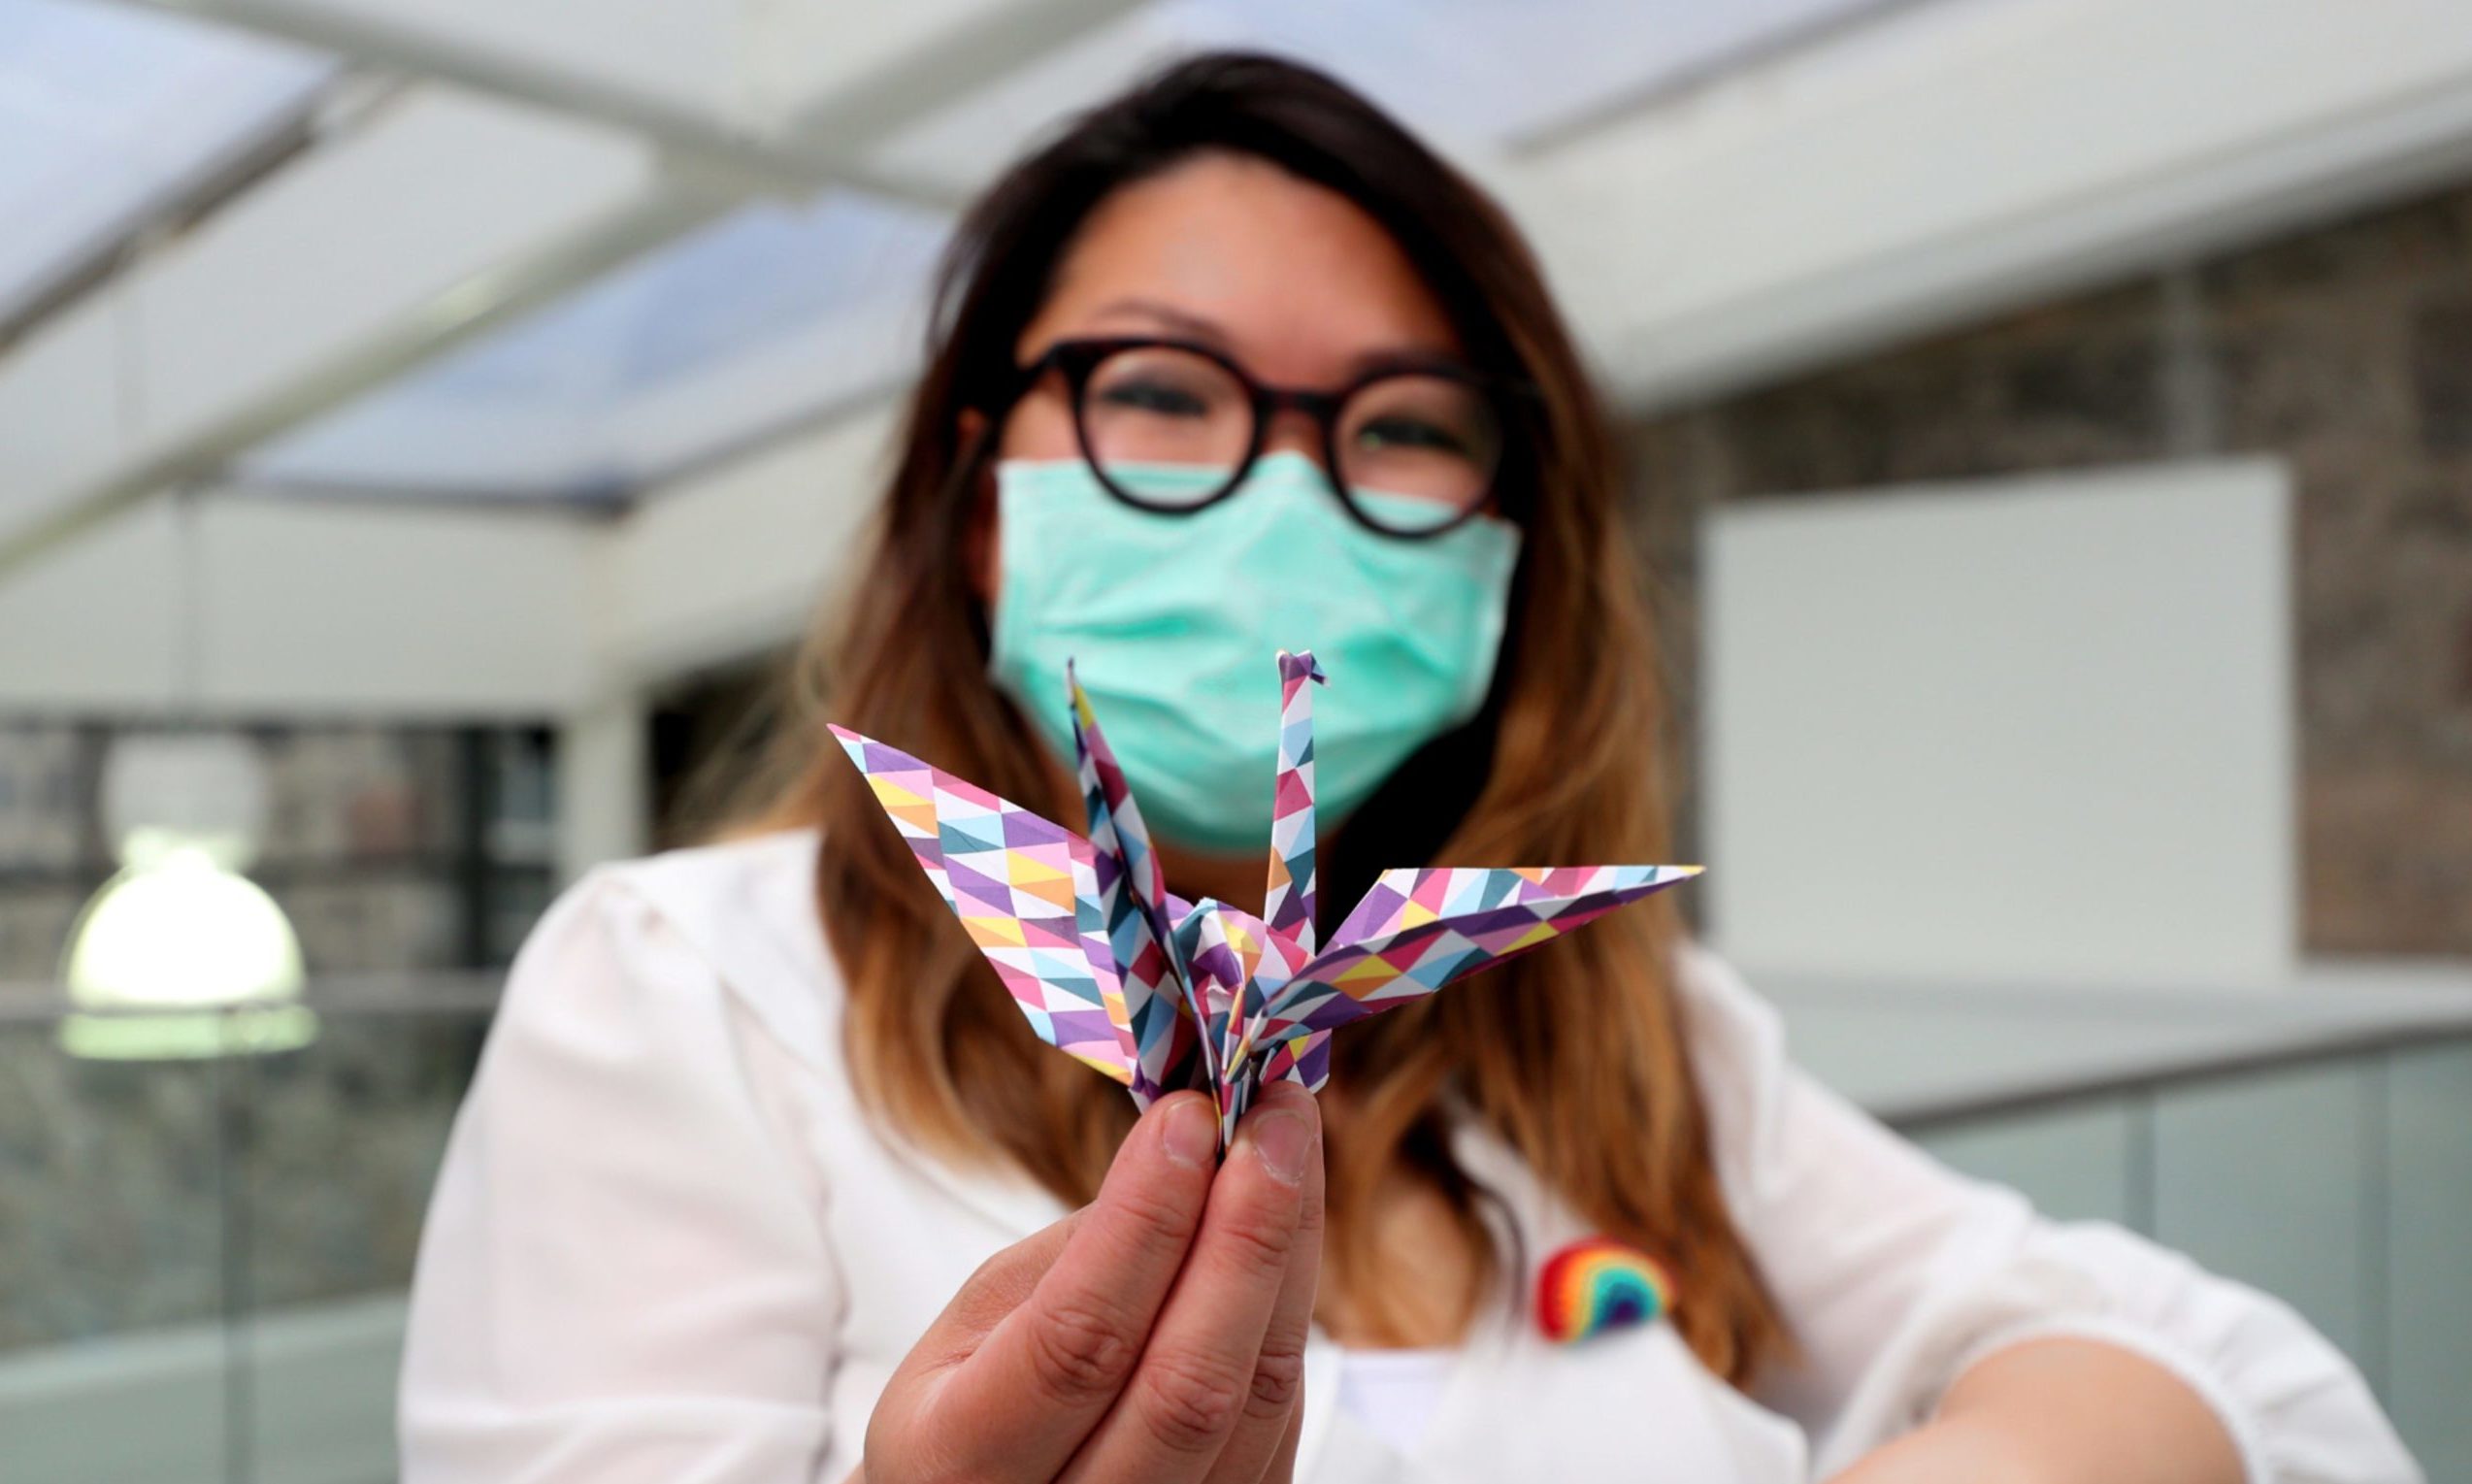 Hundreds of people took part in Janet Liddel's project to fold 1,000 origami cranes.